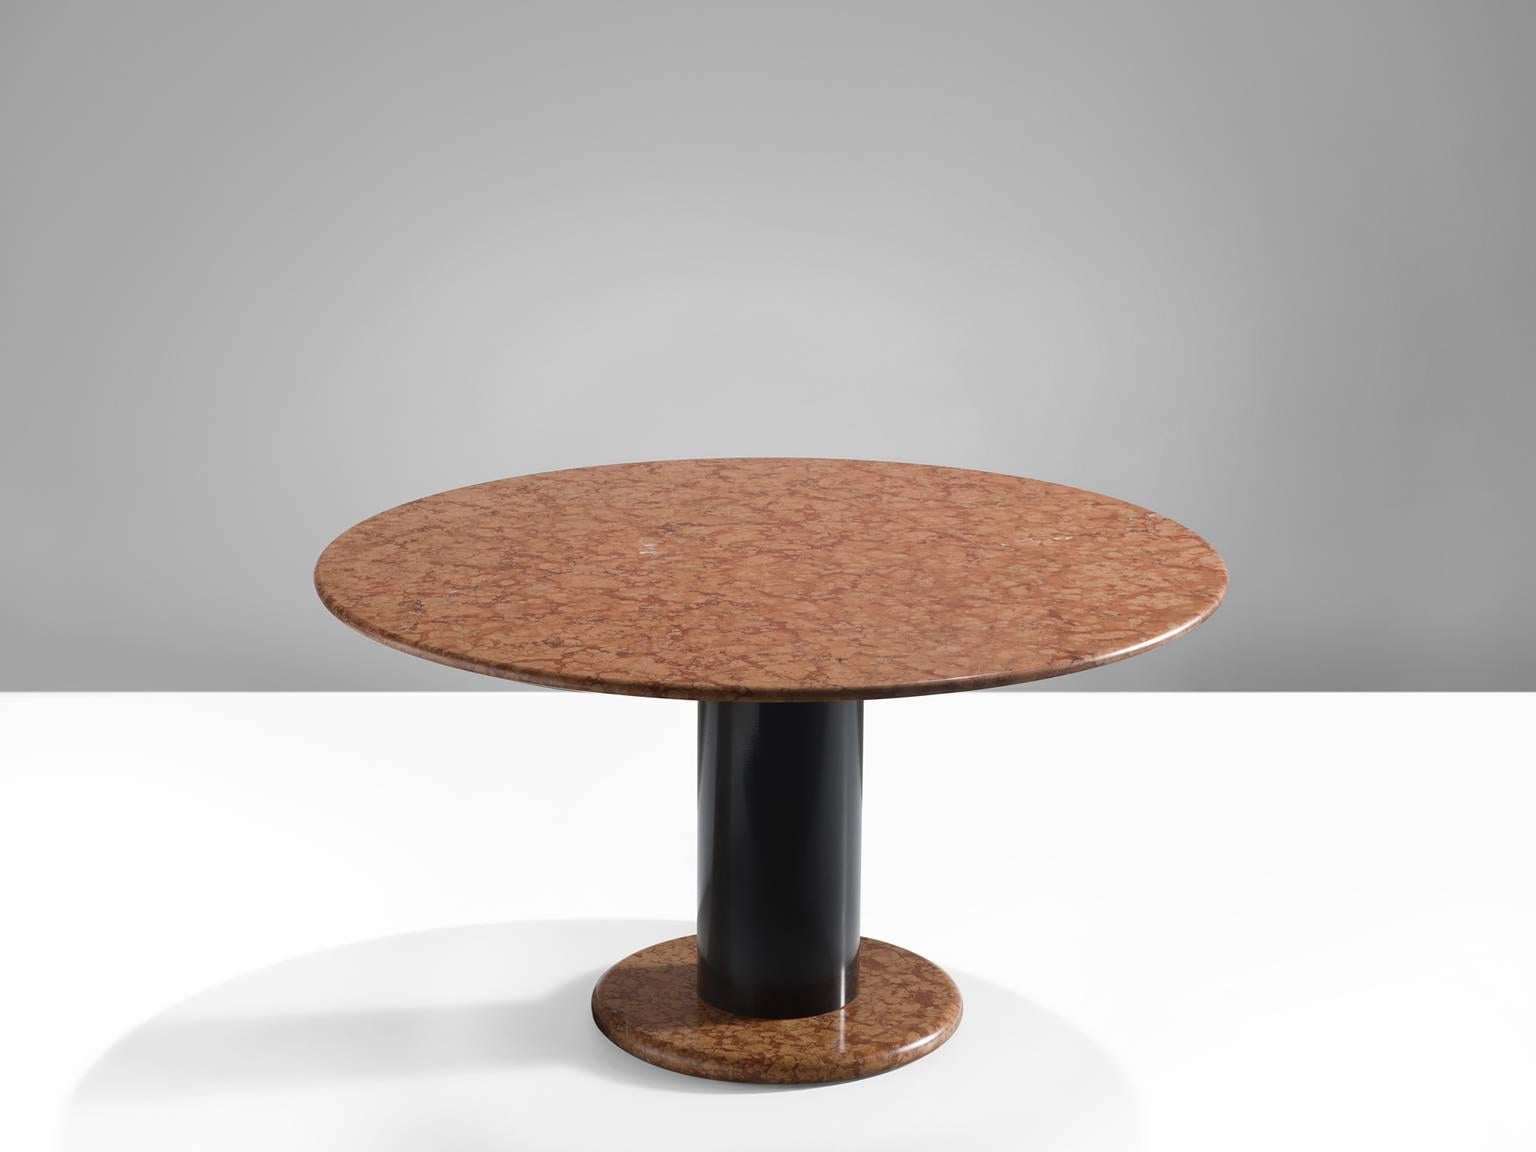 Table, in marble and metal, by Ettore Sottsass for Poltronova, Italy 1965. 

Round pedestal table by Italian designer Ettore Sottsass. A orange-pink round base with black metal cylindrical column. The round top is executed in beautiful rose marble.